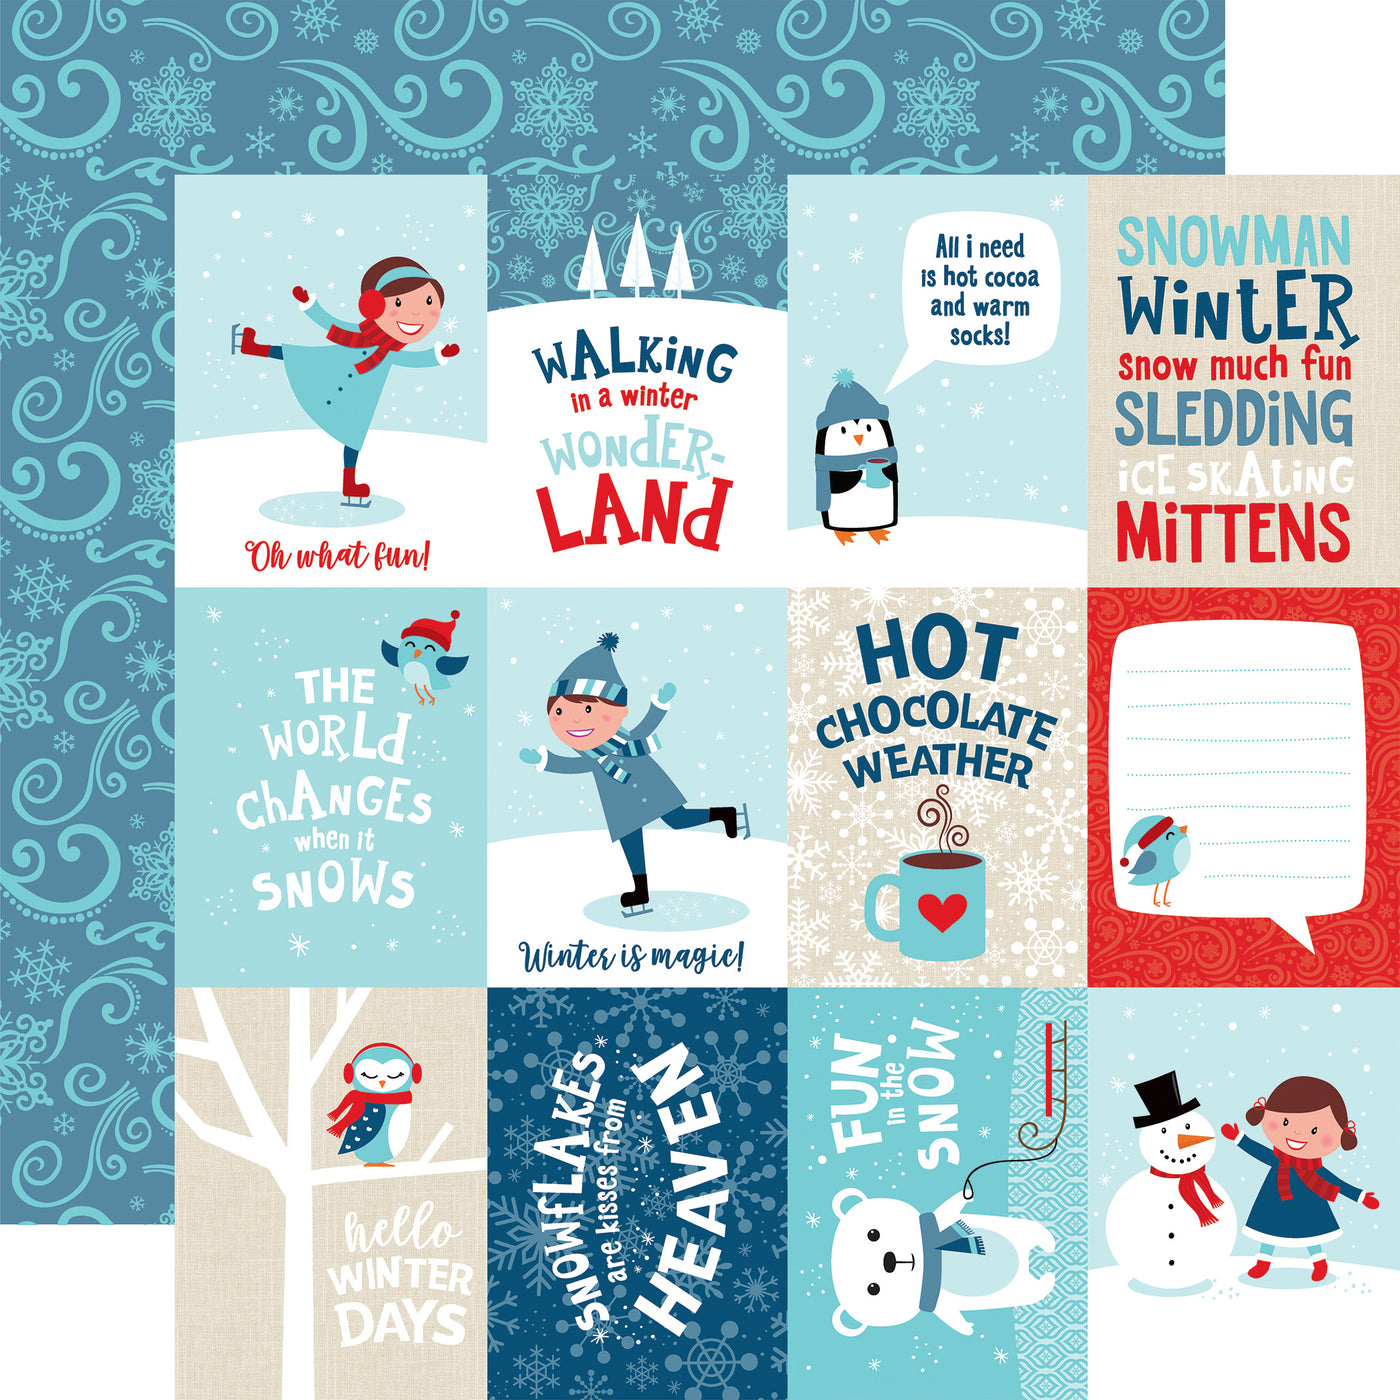 Multi-Colored (Side A - 3x4 journaling cards showing various winter scenes and phrases, Side B - blue snowflakes swirls on a navy blue background)